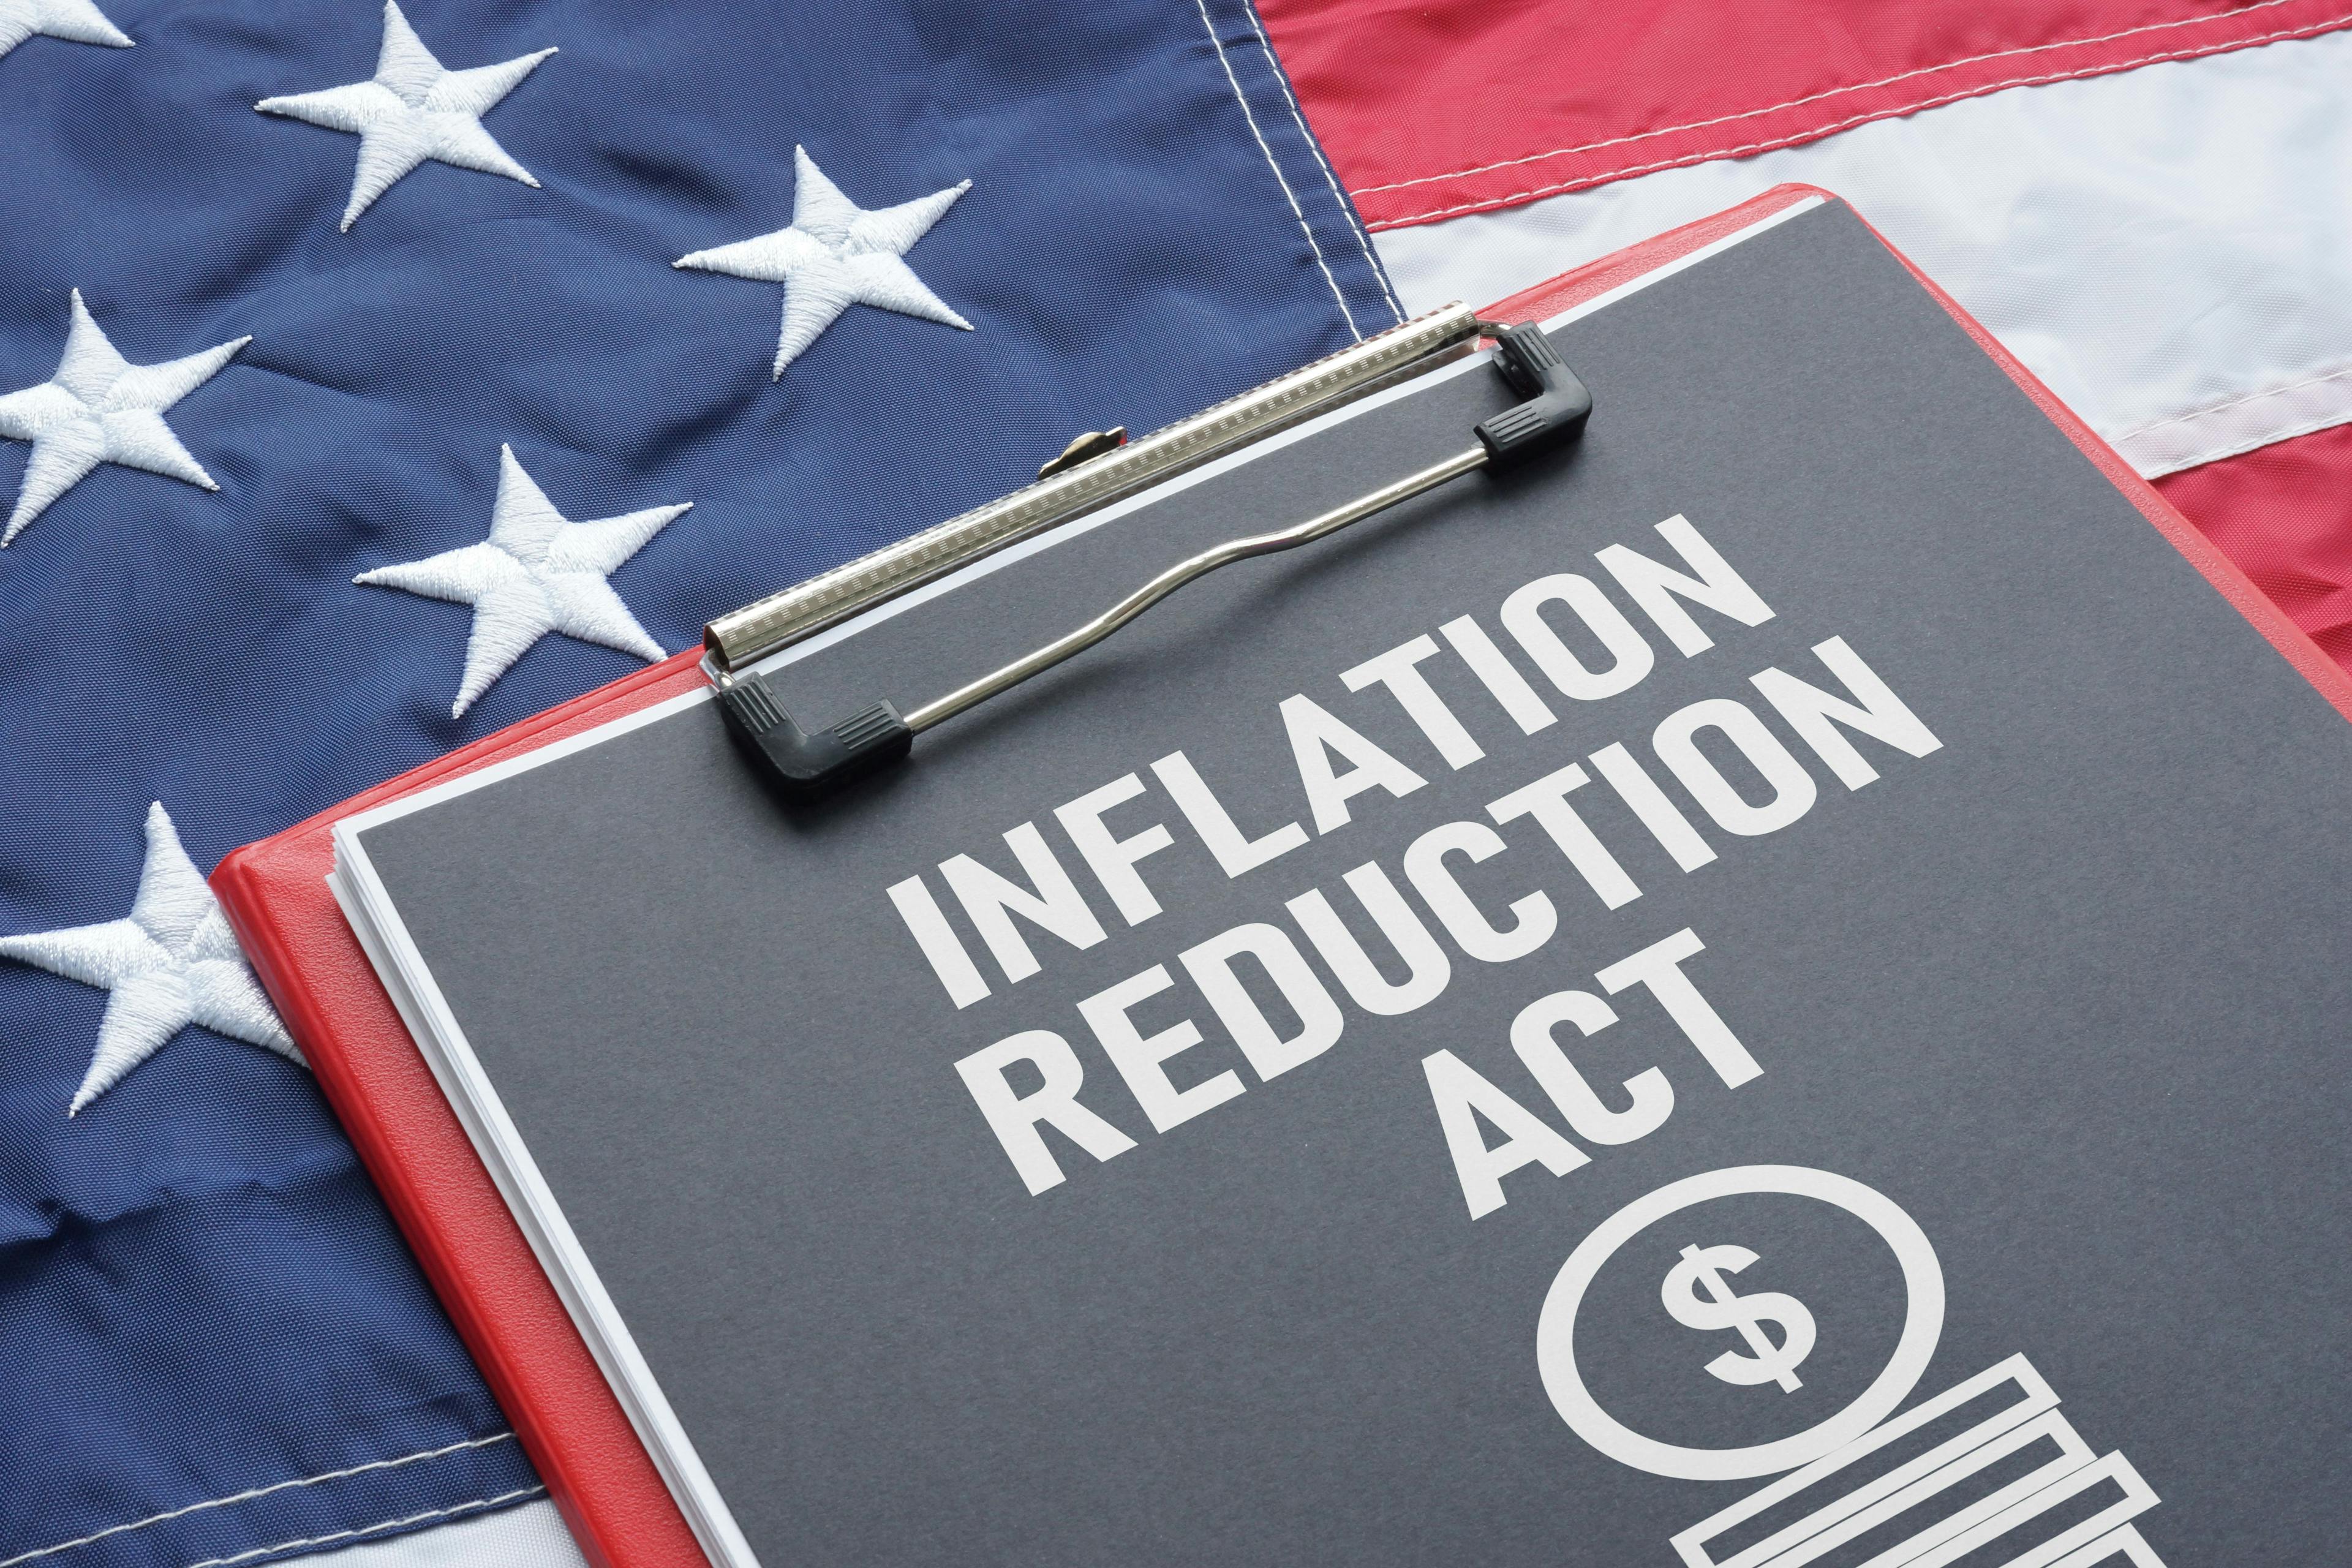 Inflation Reduction Act / Andrii - stock.adobe.com